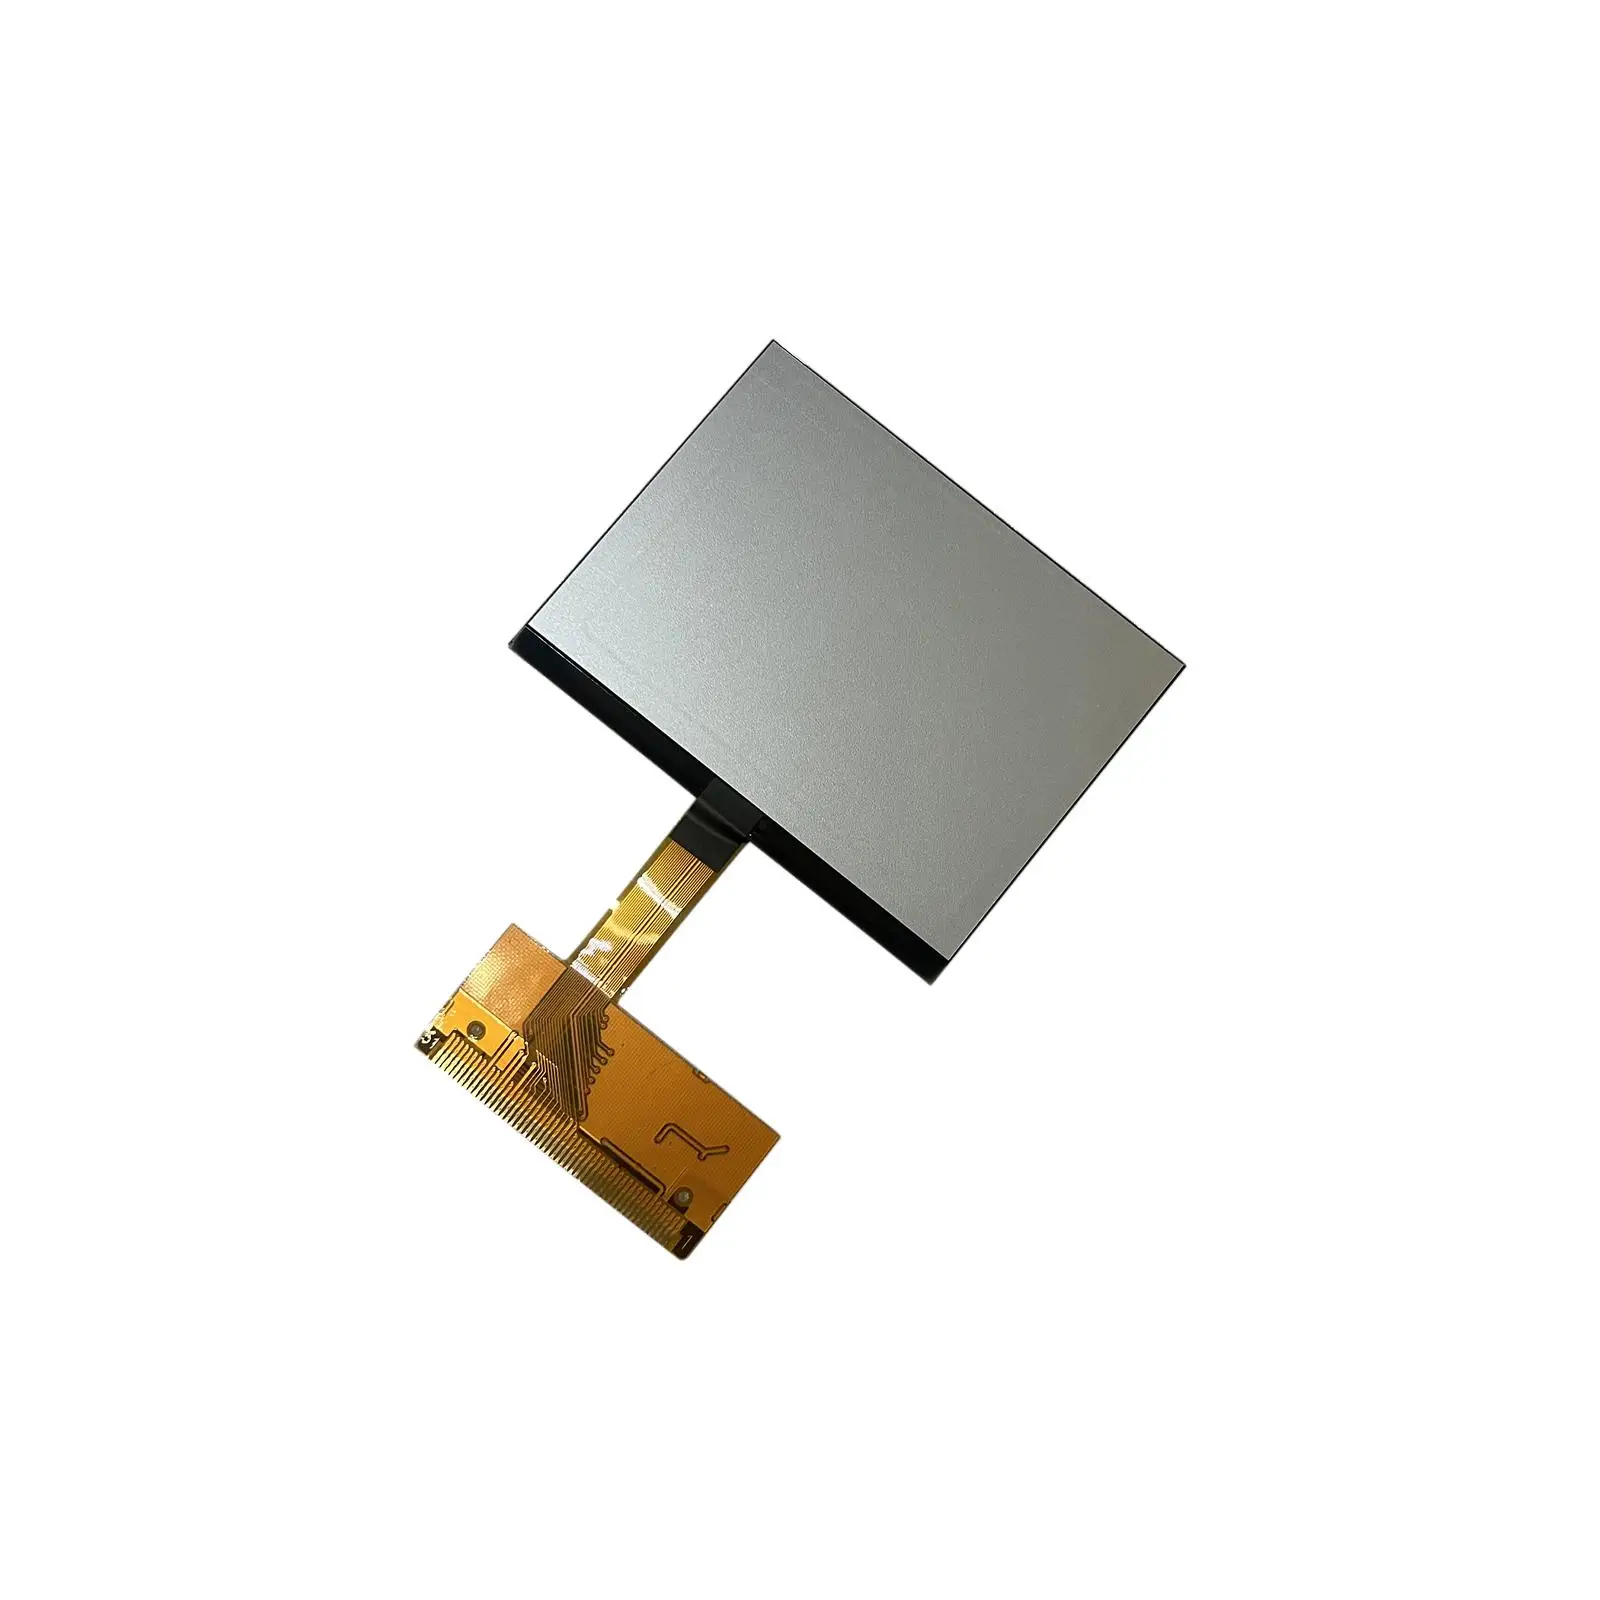 LCD Display Screen Replacements Repair Parts for Audi A3 A4 Good Performance